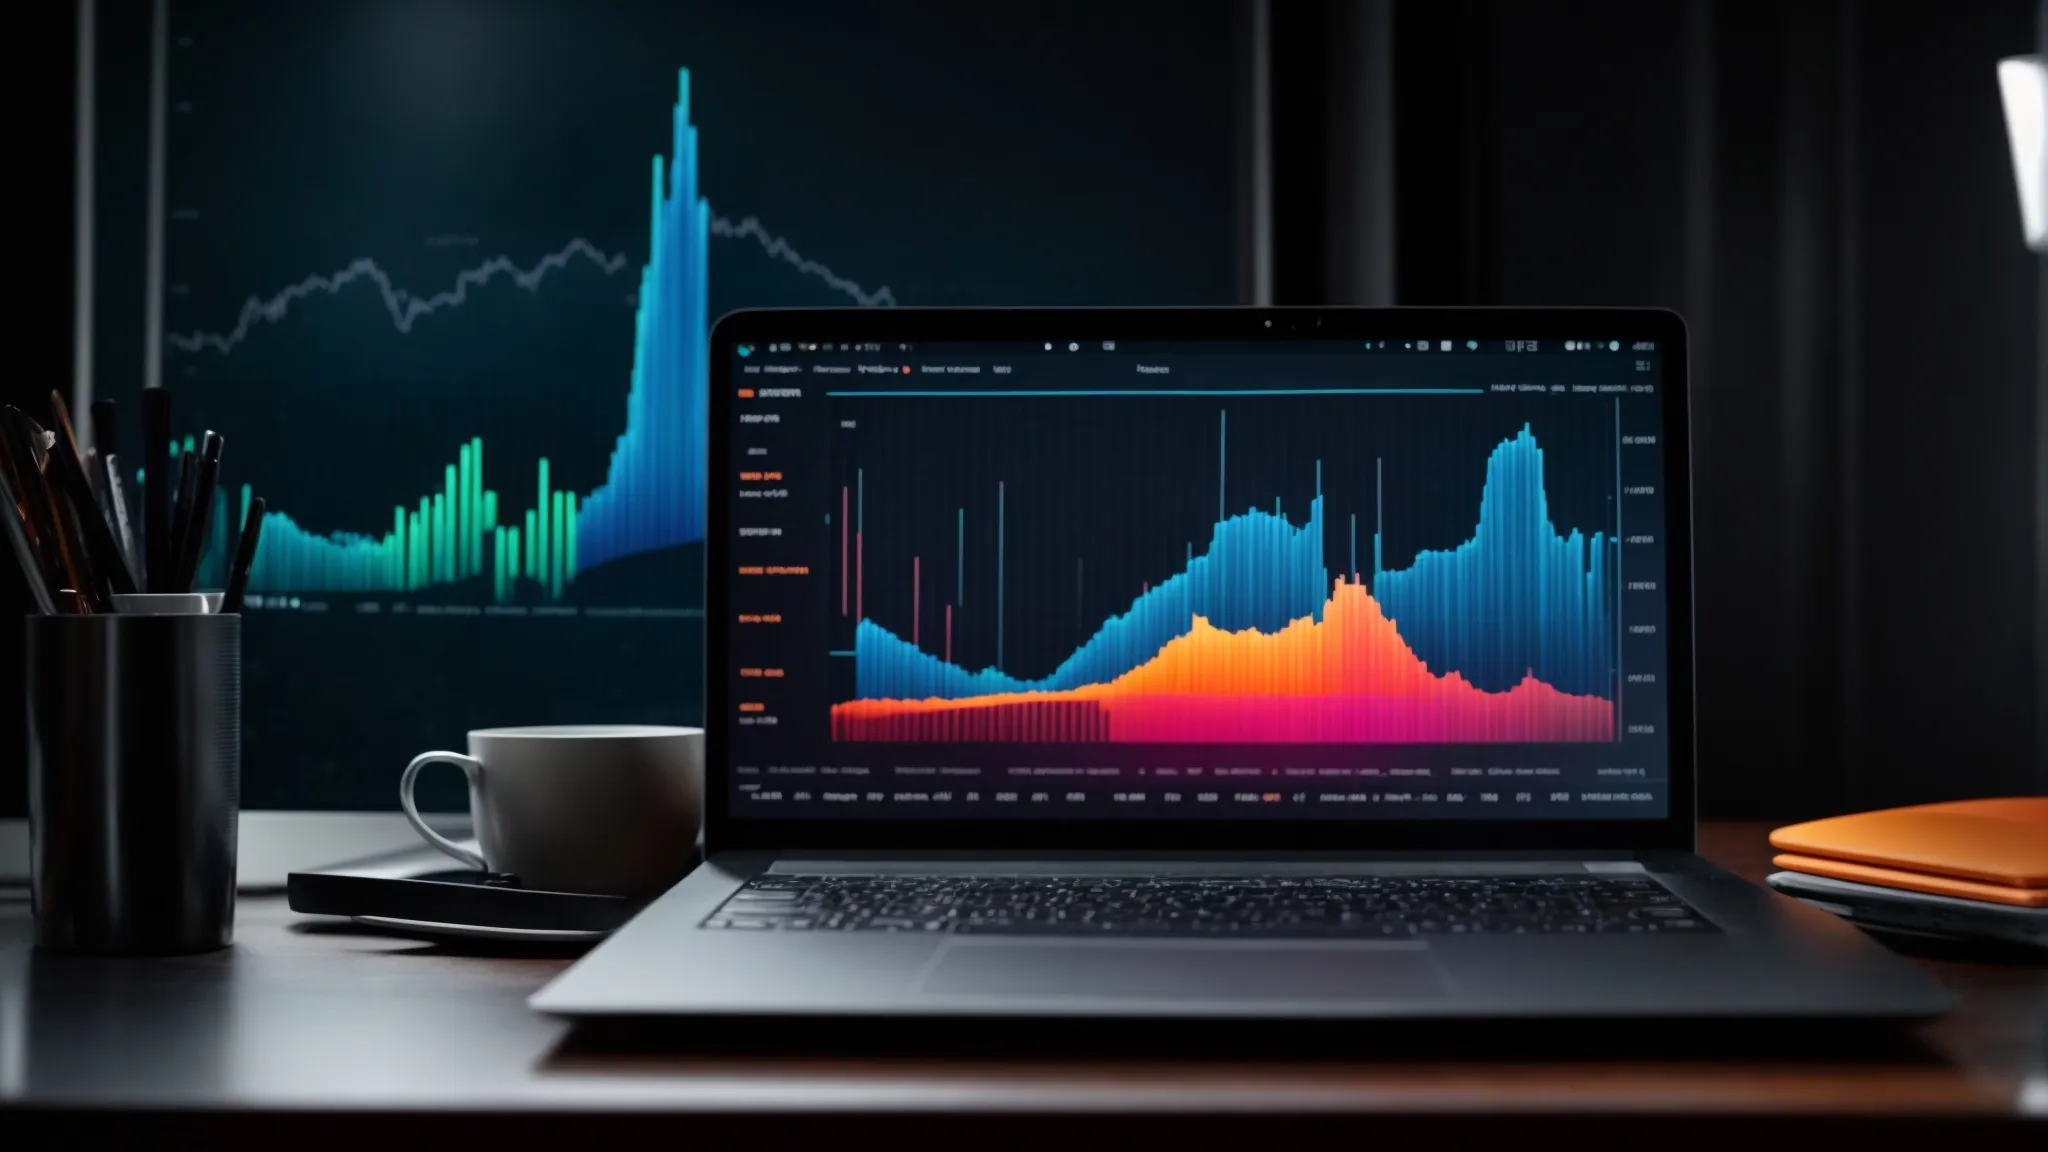 a laptop with vibrant graphs and charts on the screen sits atop a sleek, modern desk, symbolizing the analysis of data metrics.